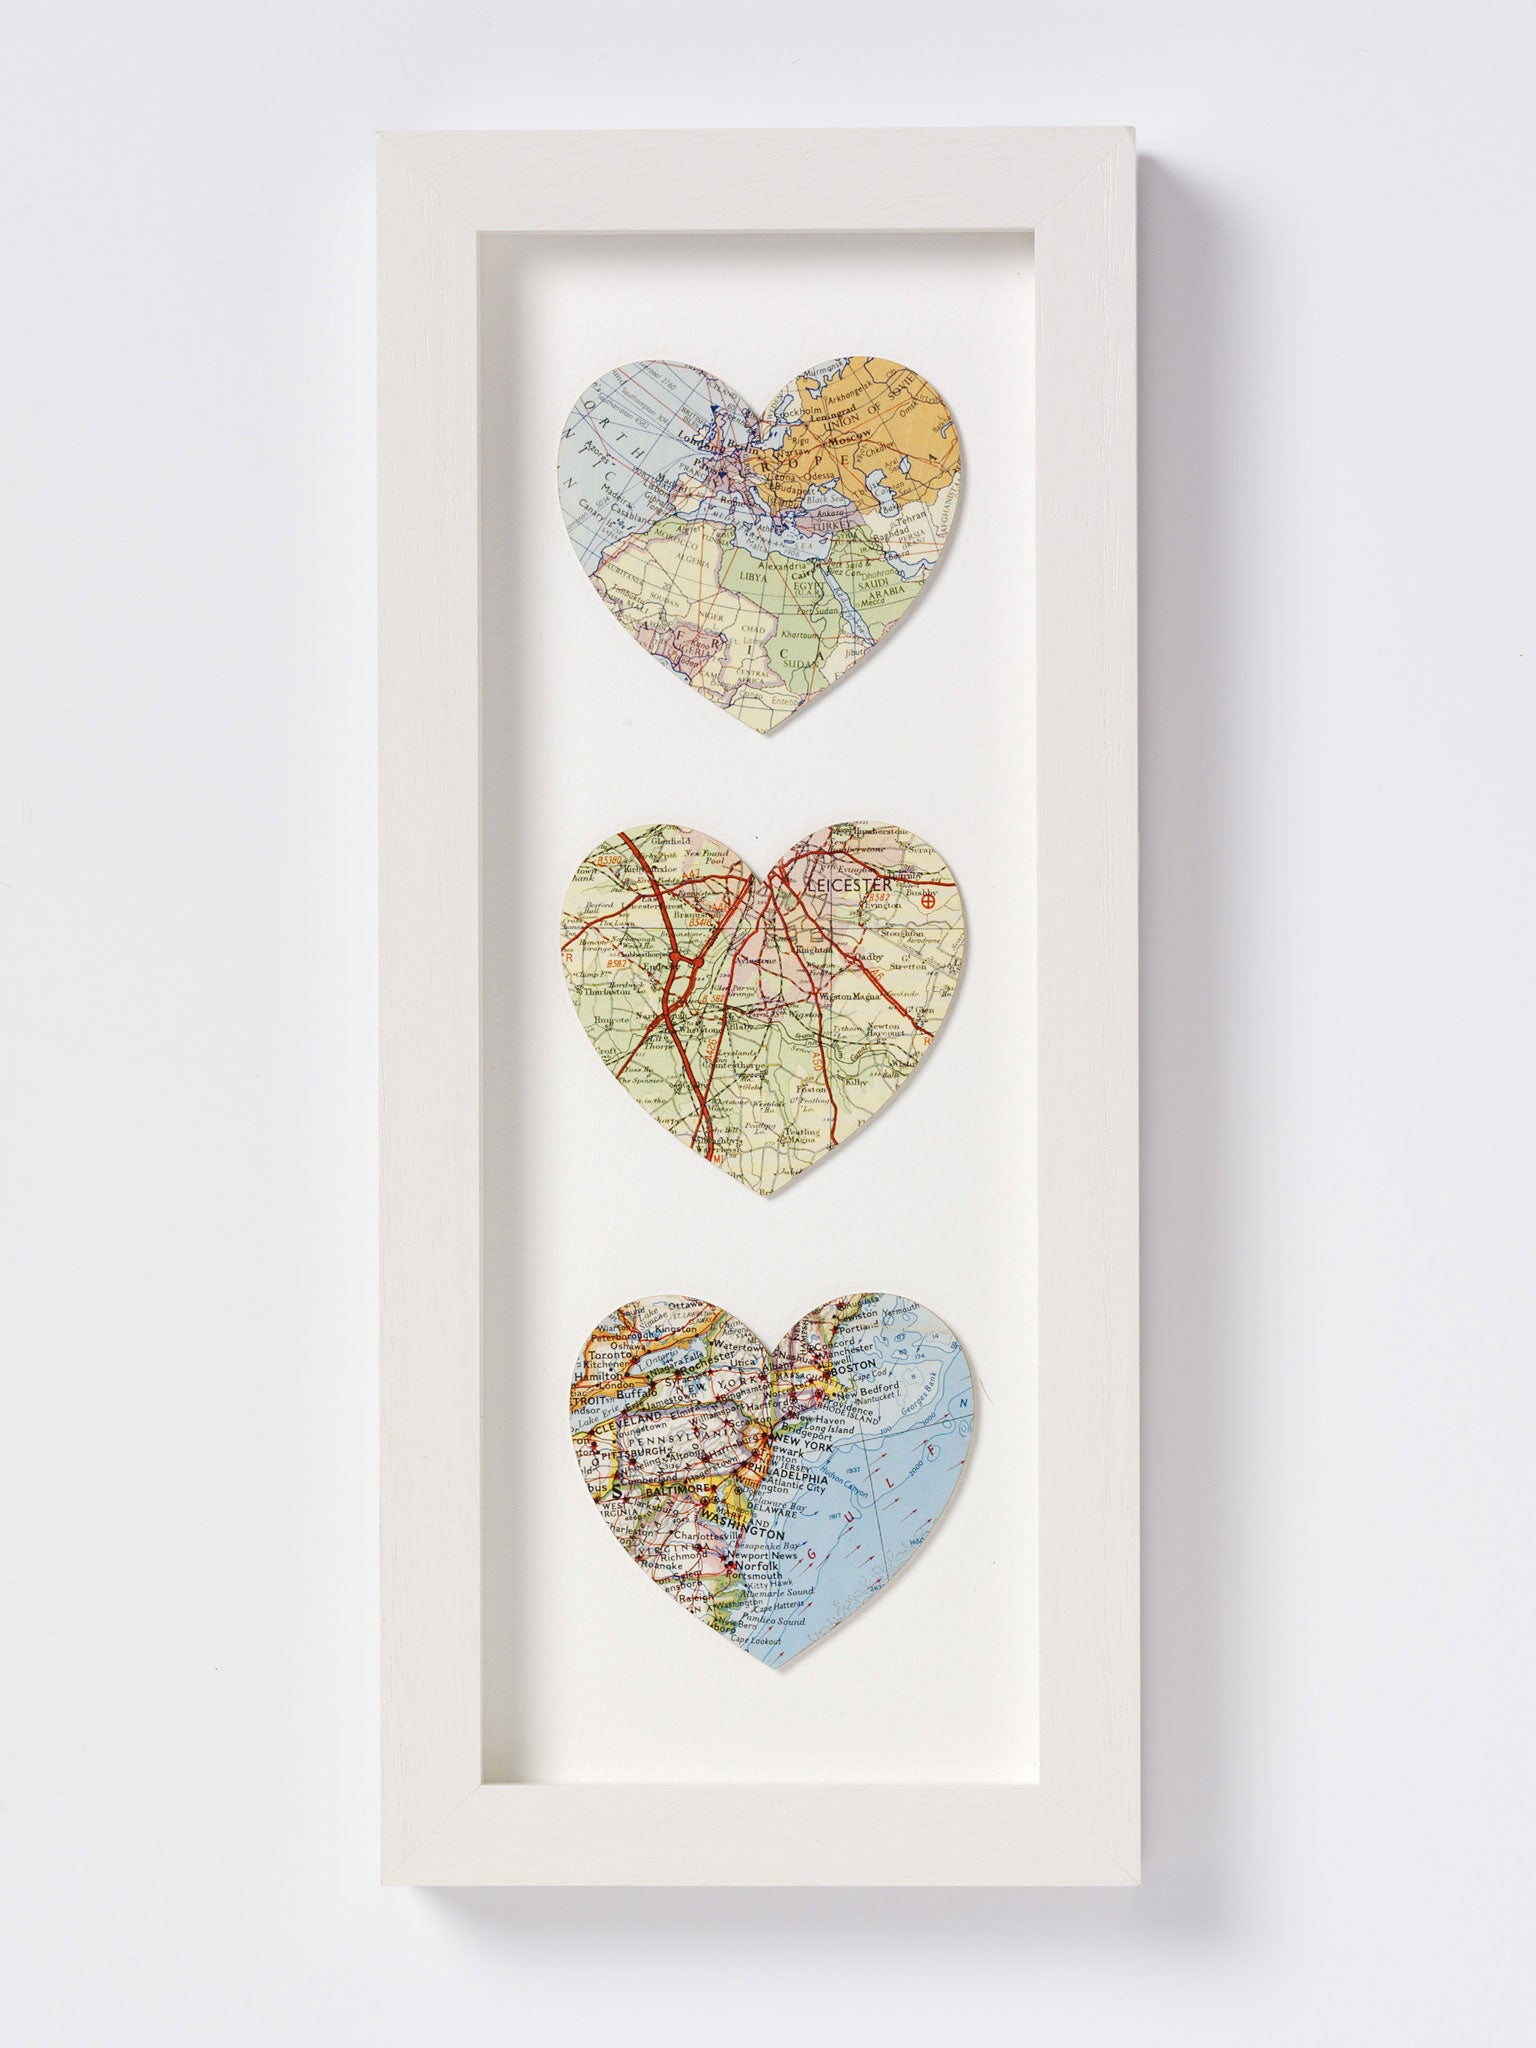 Handmde Personalised Gifts and Art from the UK | Worldwide Delivery